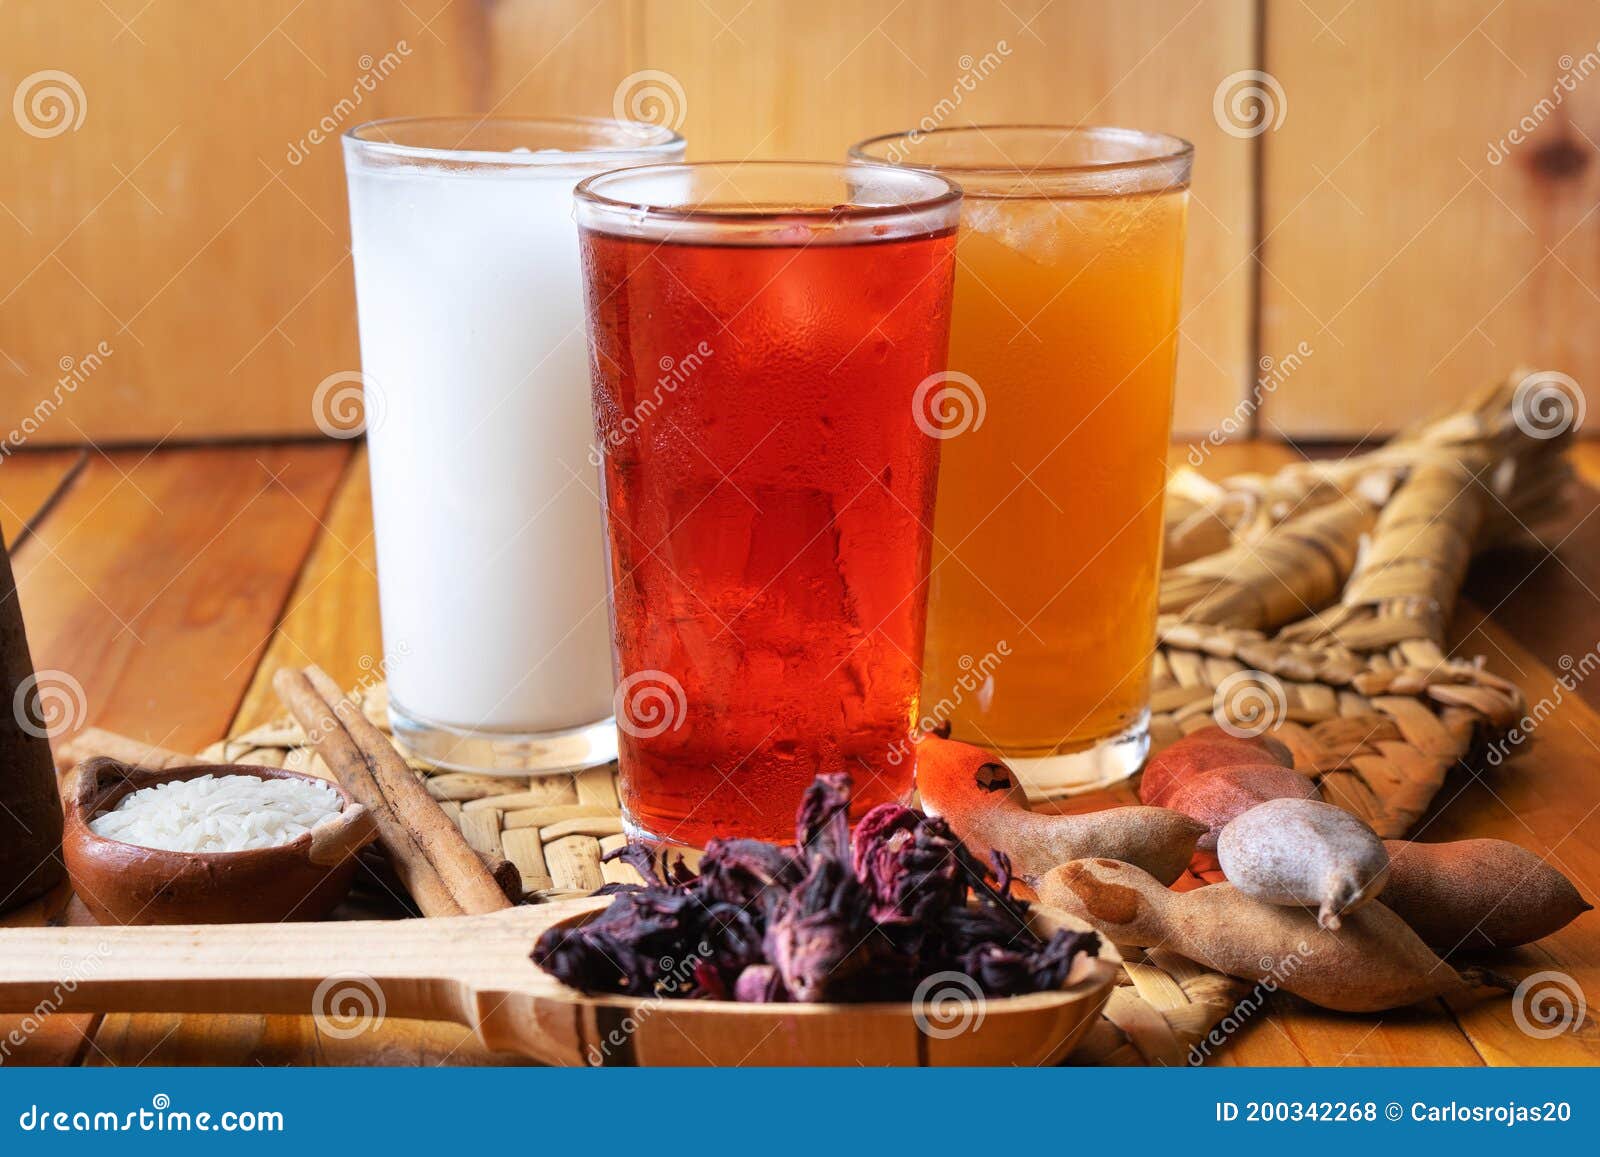 set of mexican fresh water also called `aguas frescas`